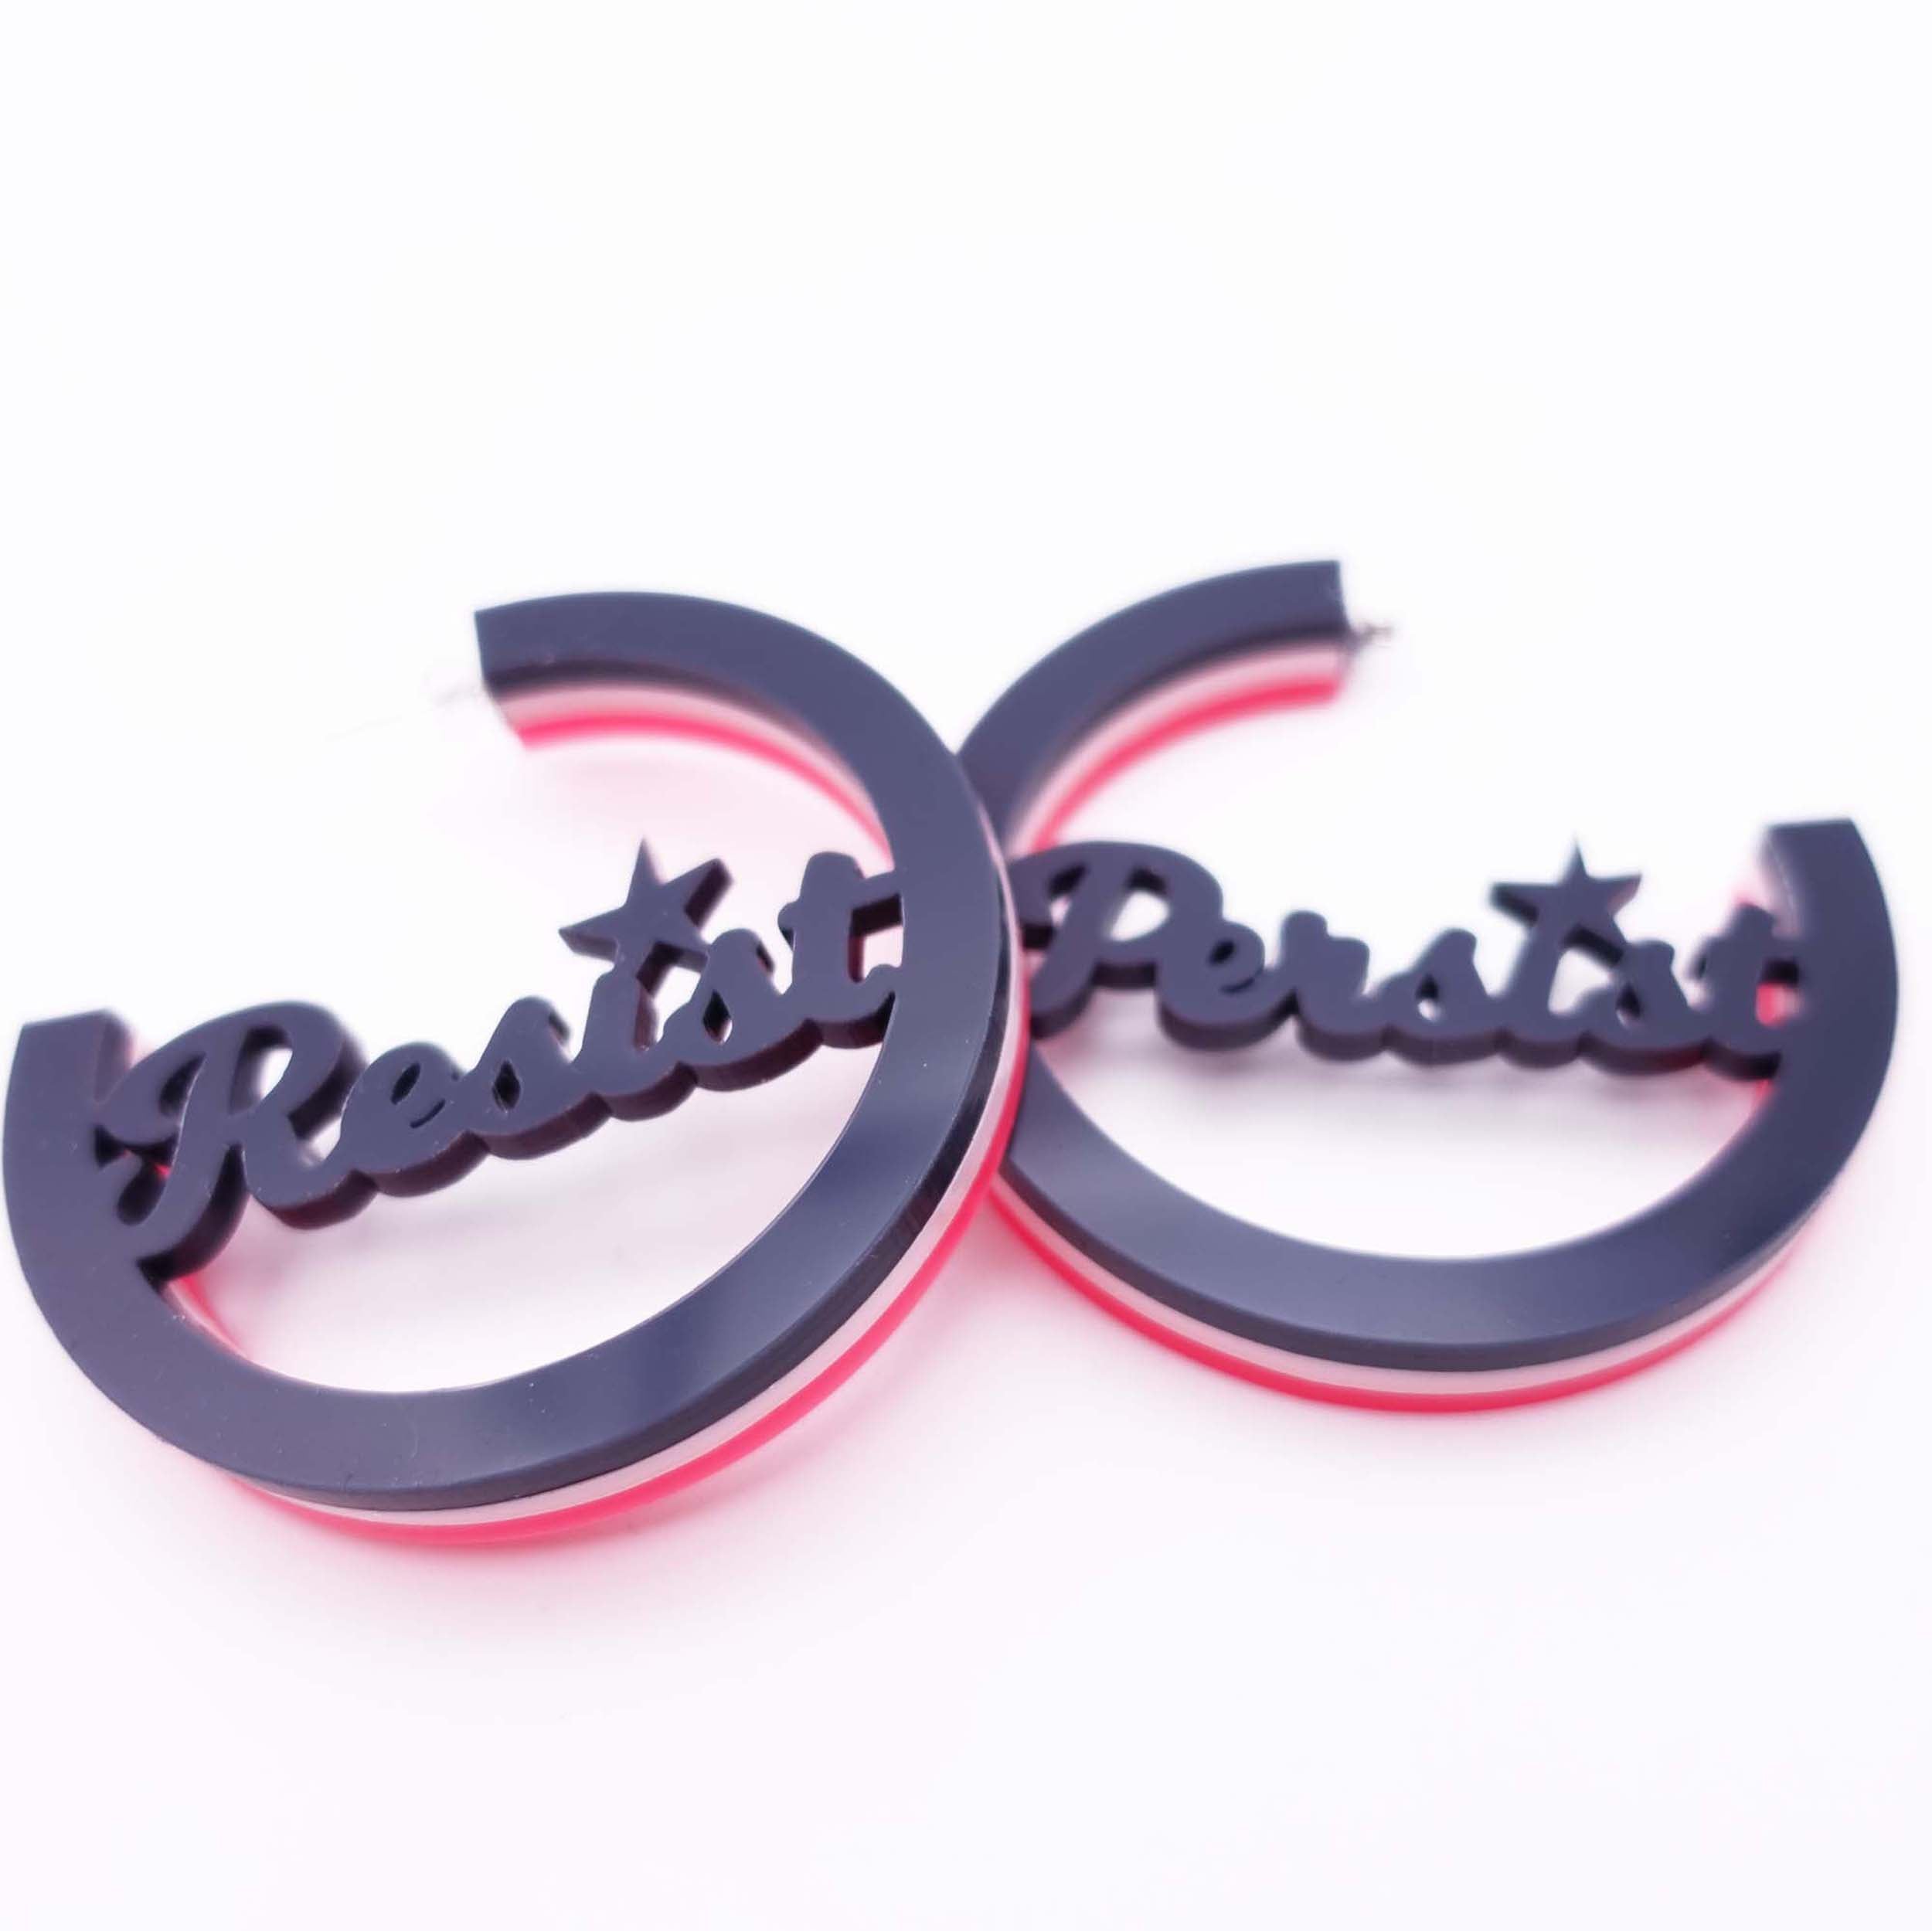 Resist and Persist statement hoops in Record Collection: Slate, baby pink and hot pink. 